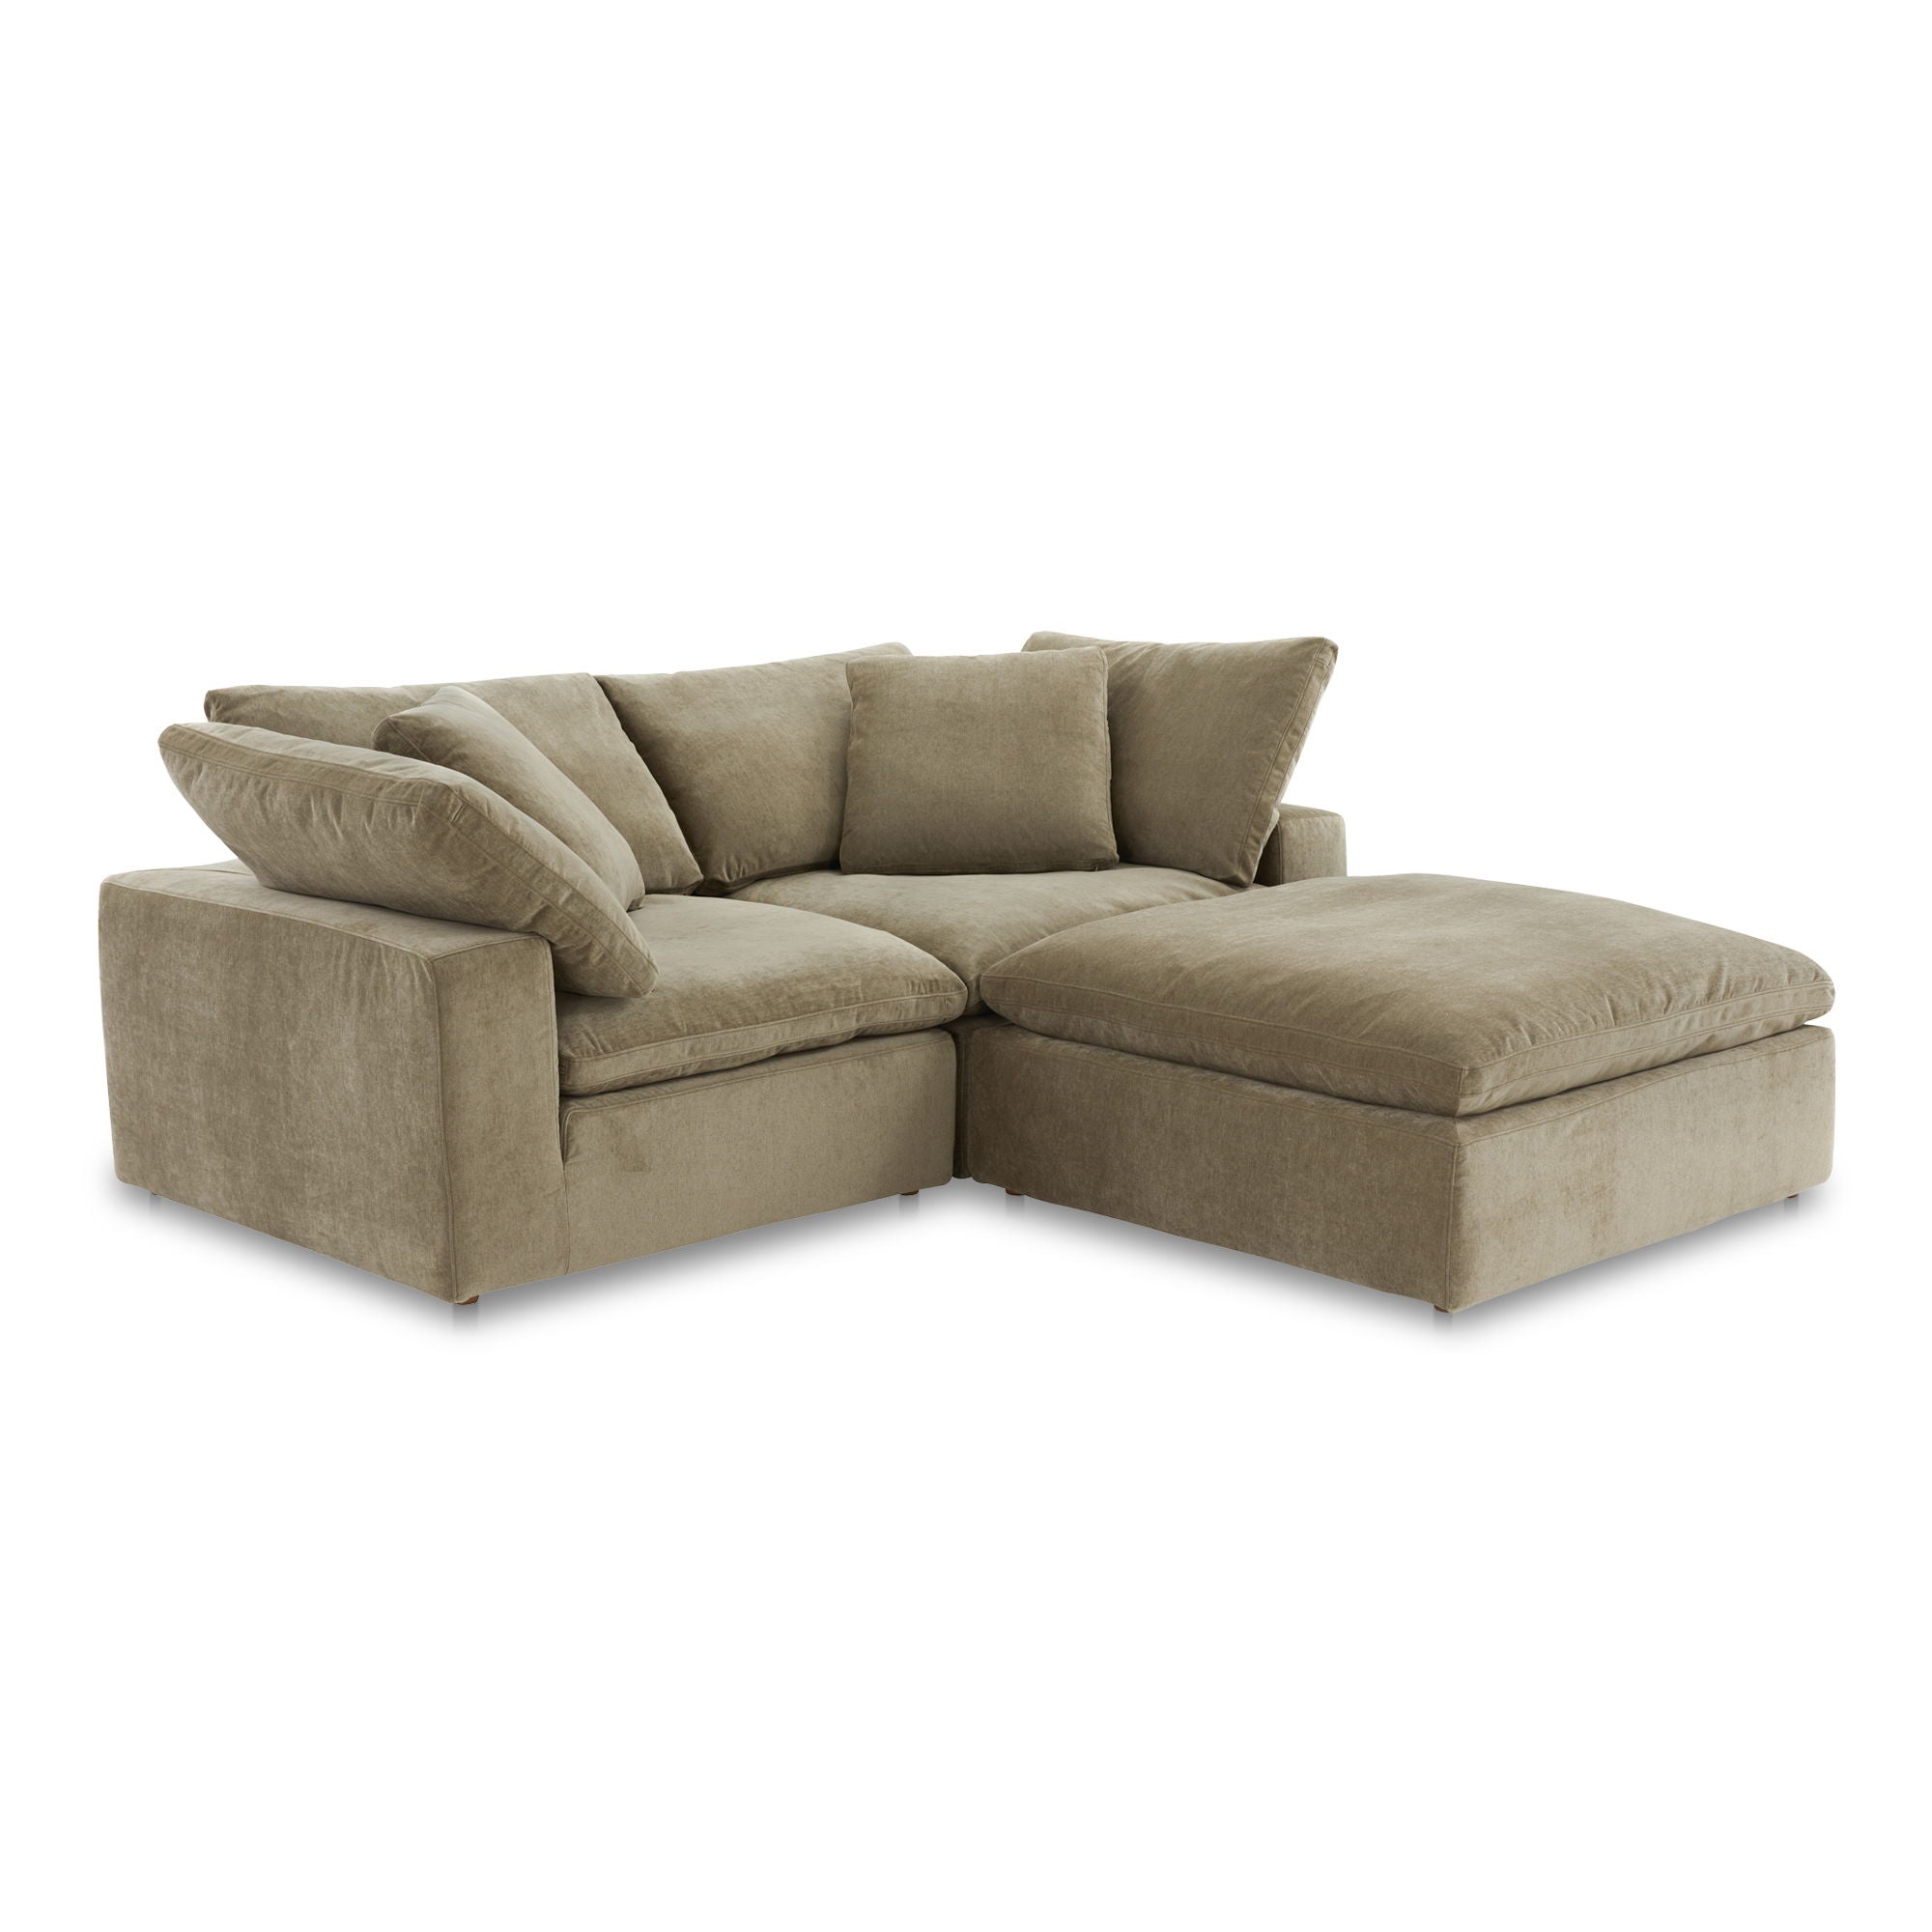 Clay Nook - Modular Sectional Performance - Desert Sage-Stationary Sectionals-American Furniture Outlet